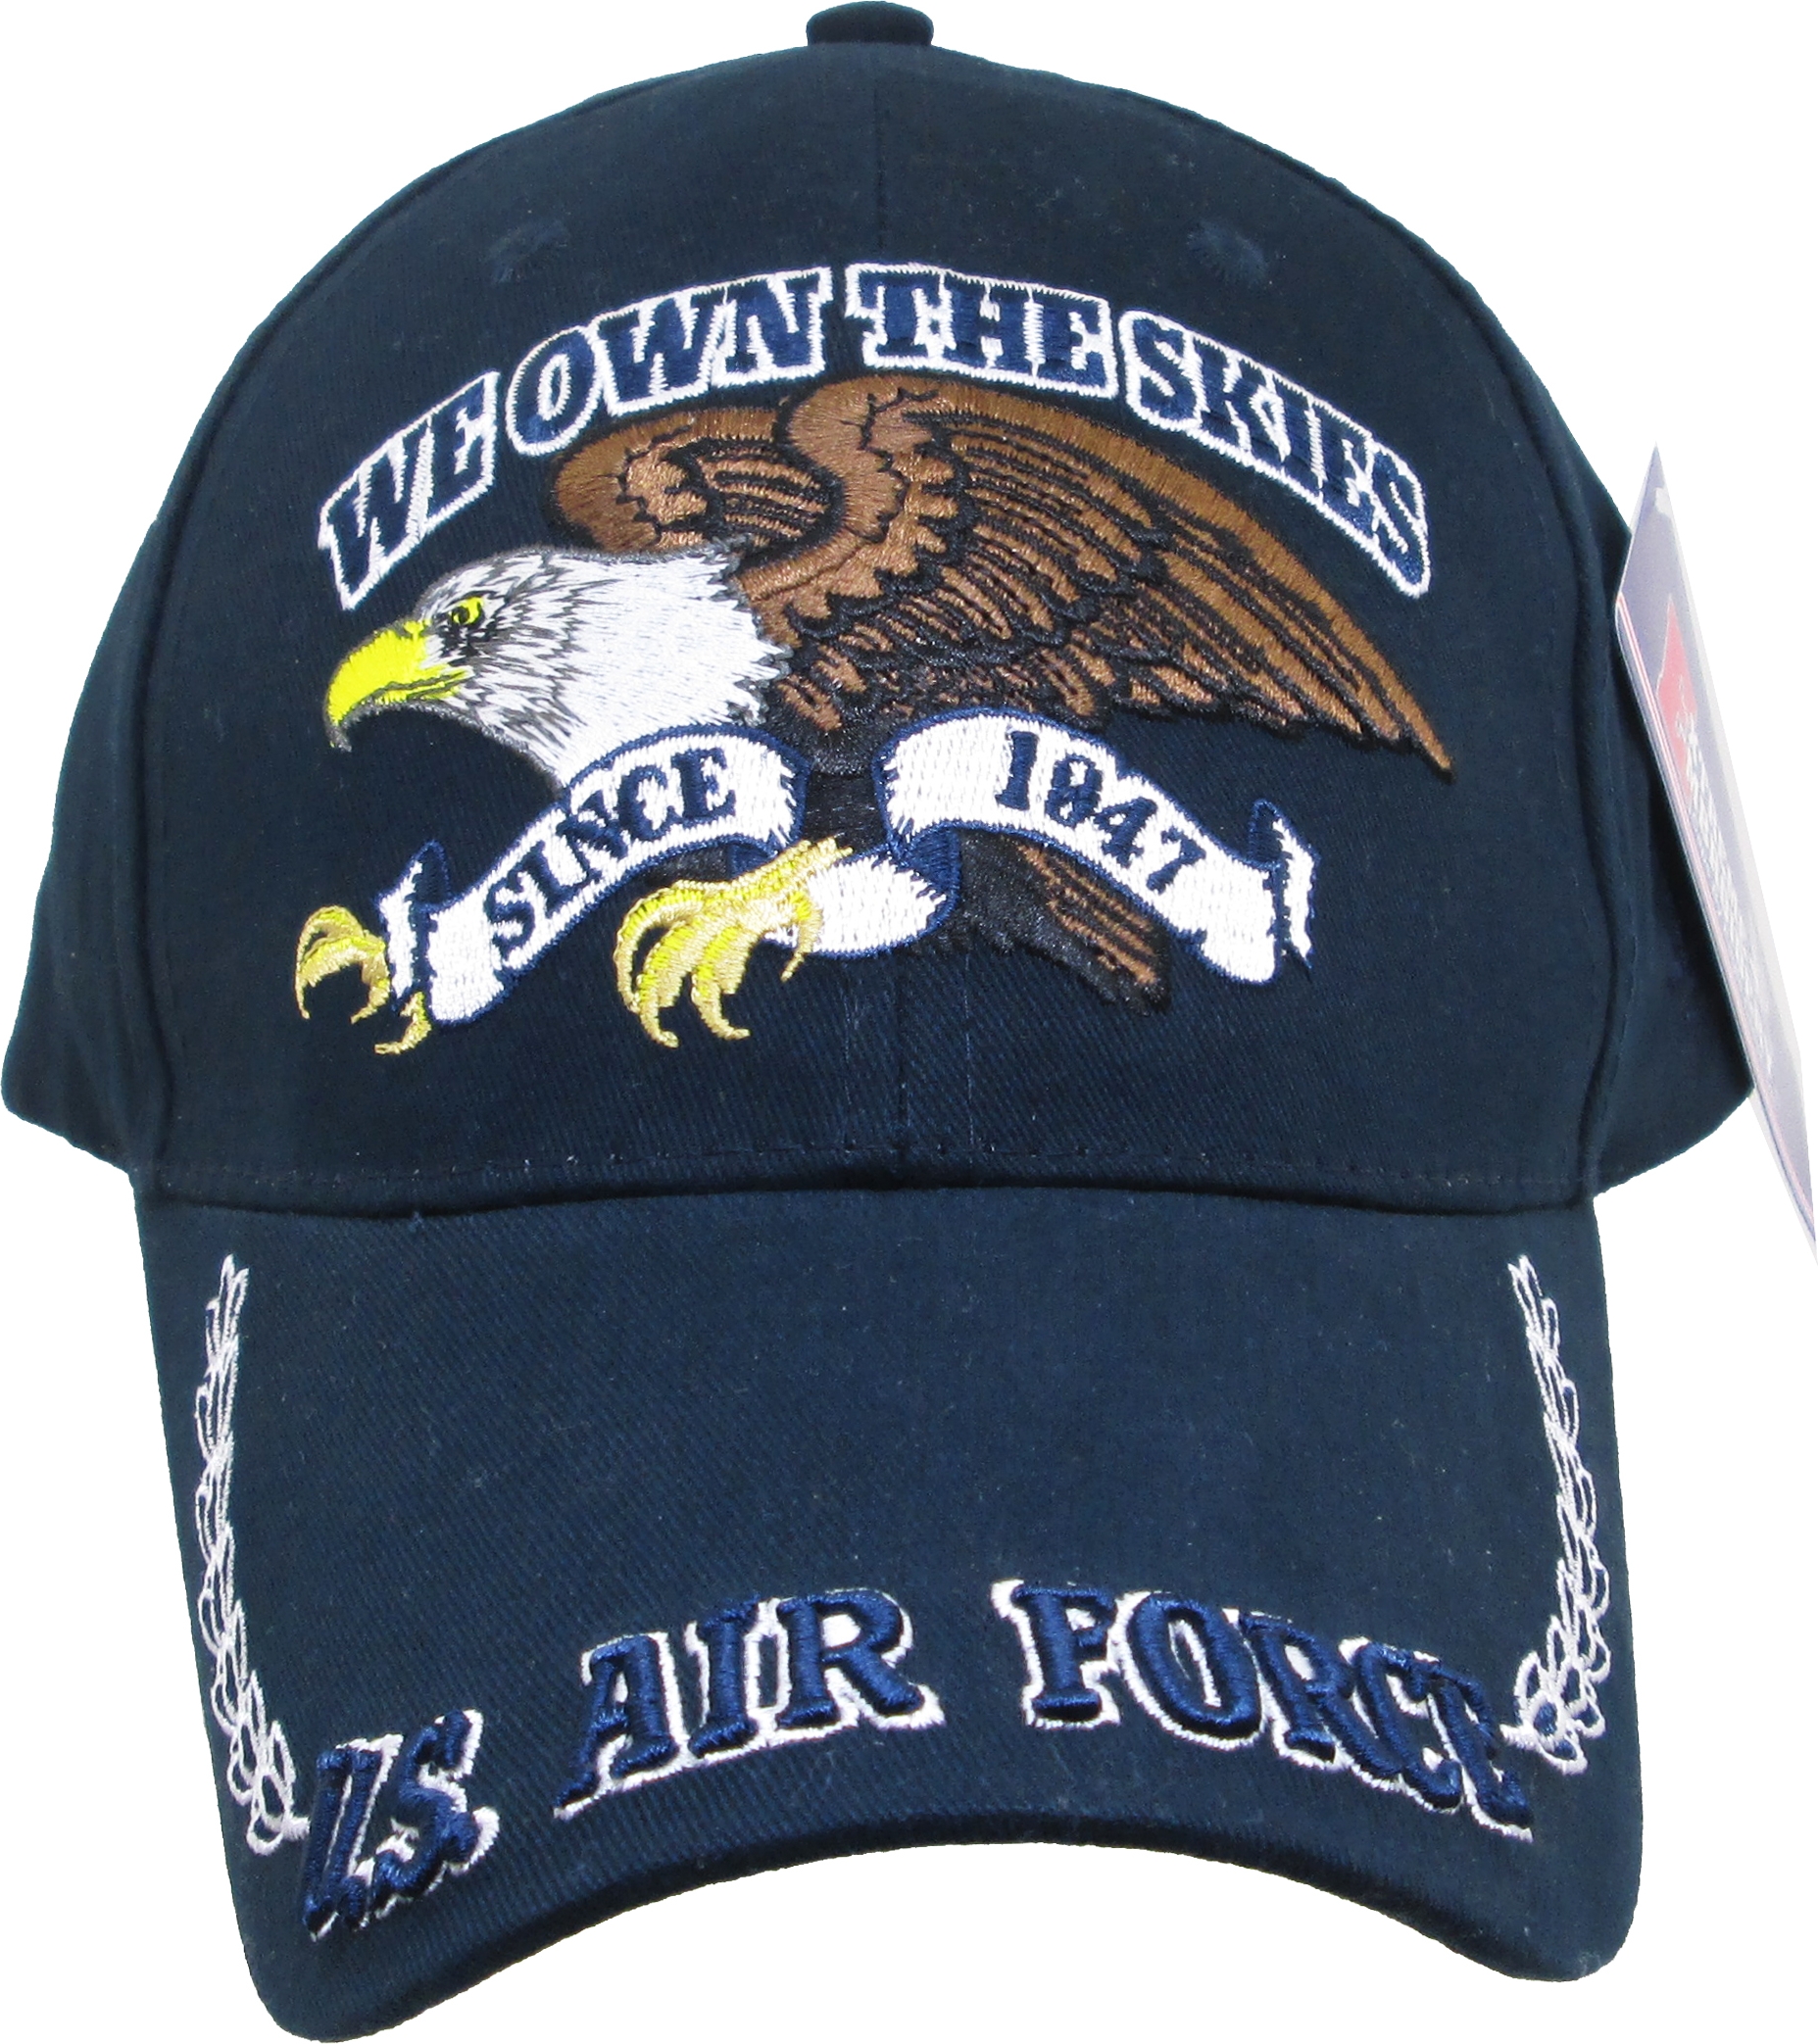 US Air Force We Own The Skies with Eagle Mens Cap [Dark Navy Blue - Adjustable] - image 1 of 2